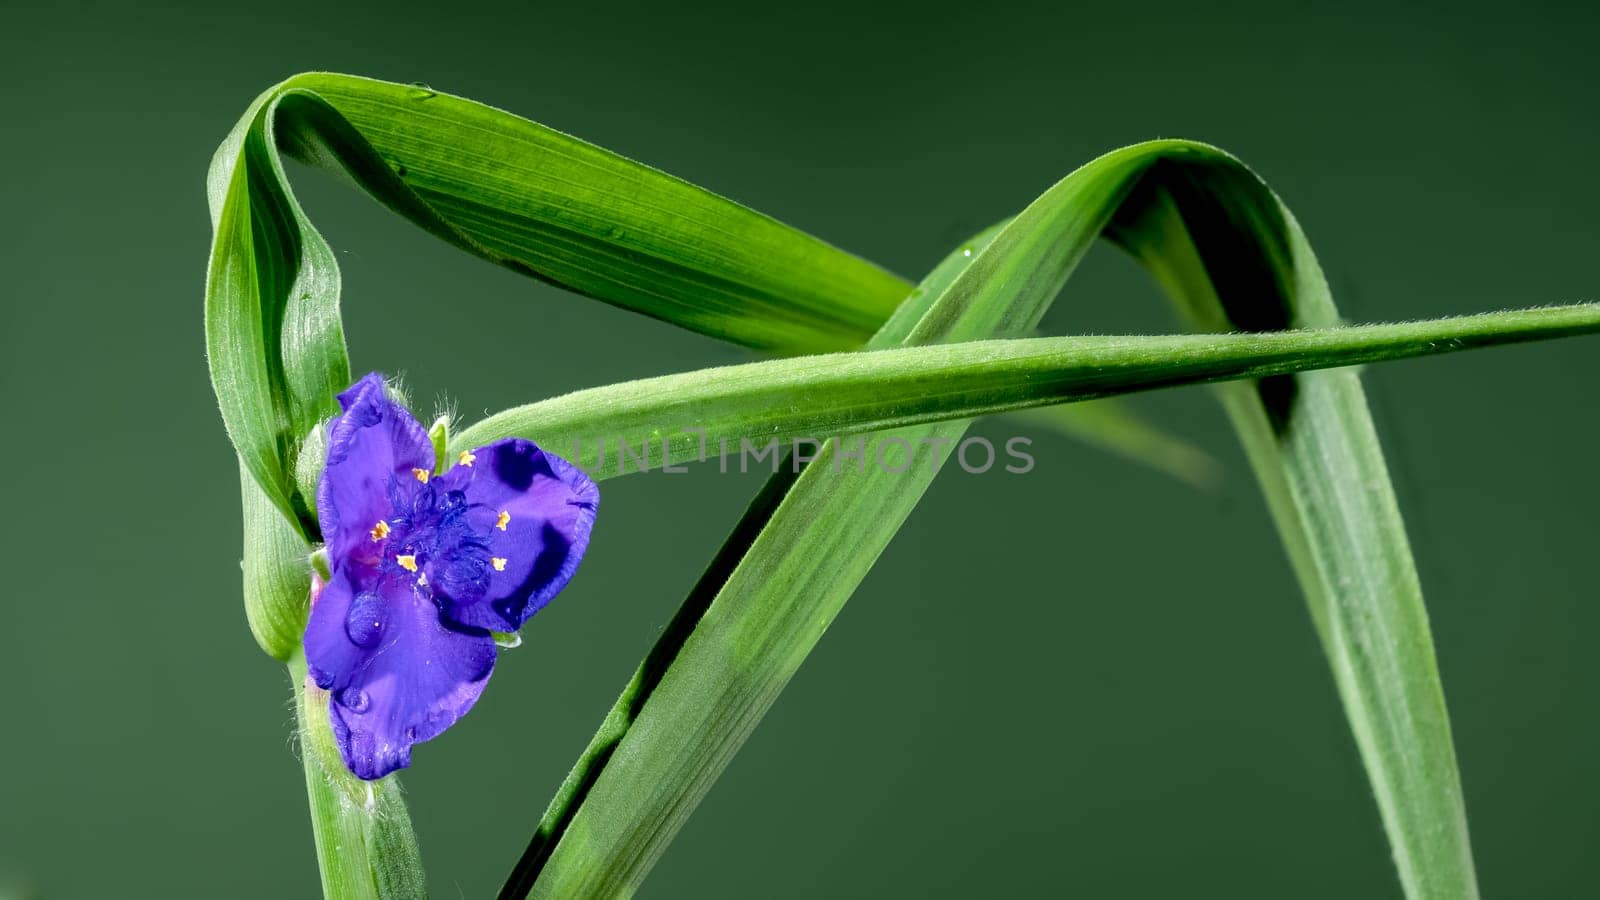 Violet Tradescantia flowers on a green background by Multipedia